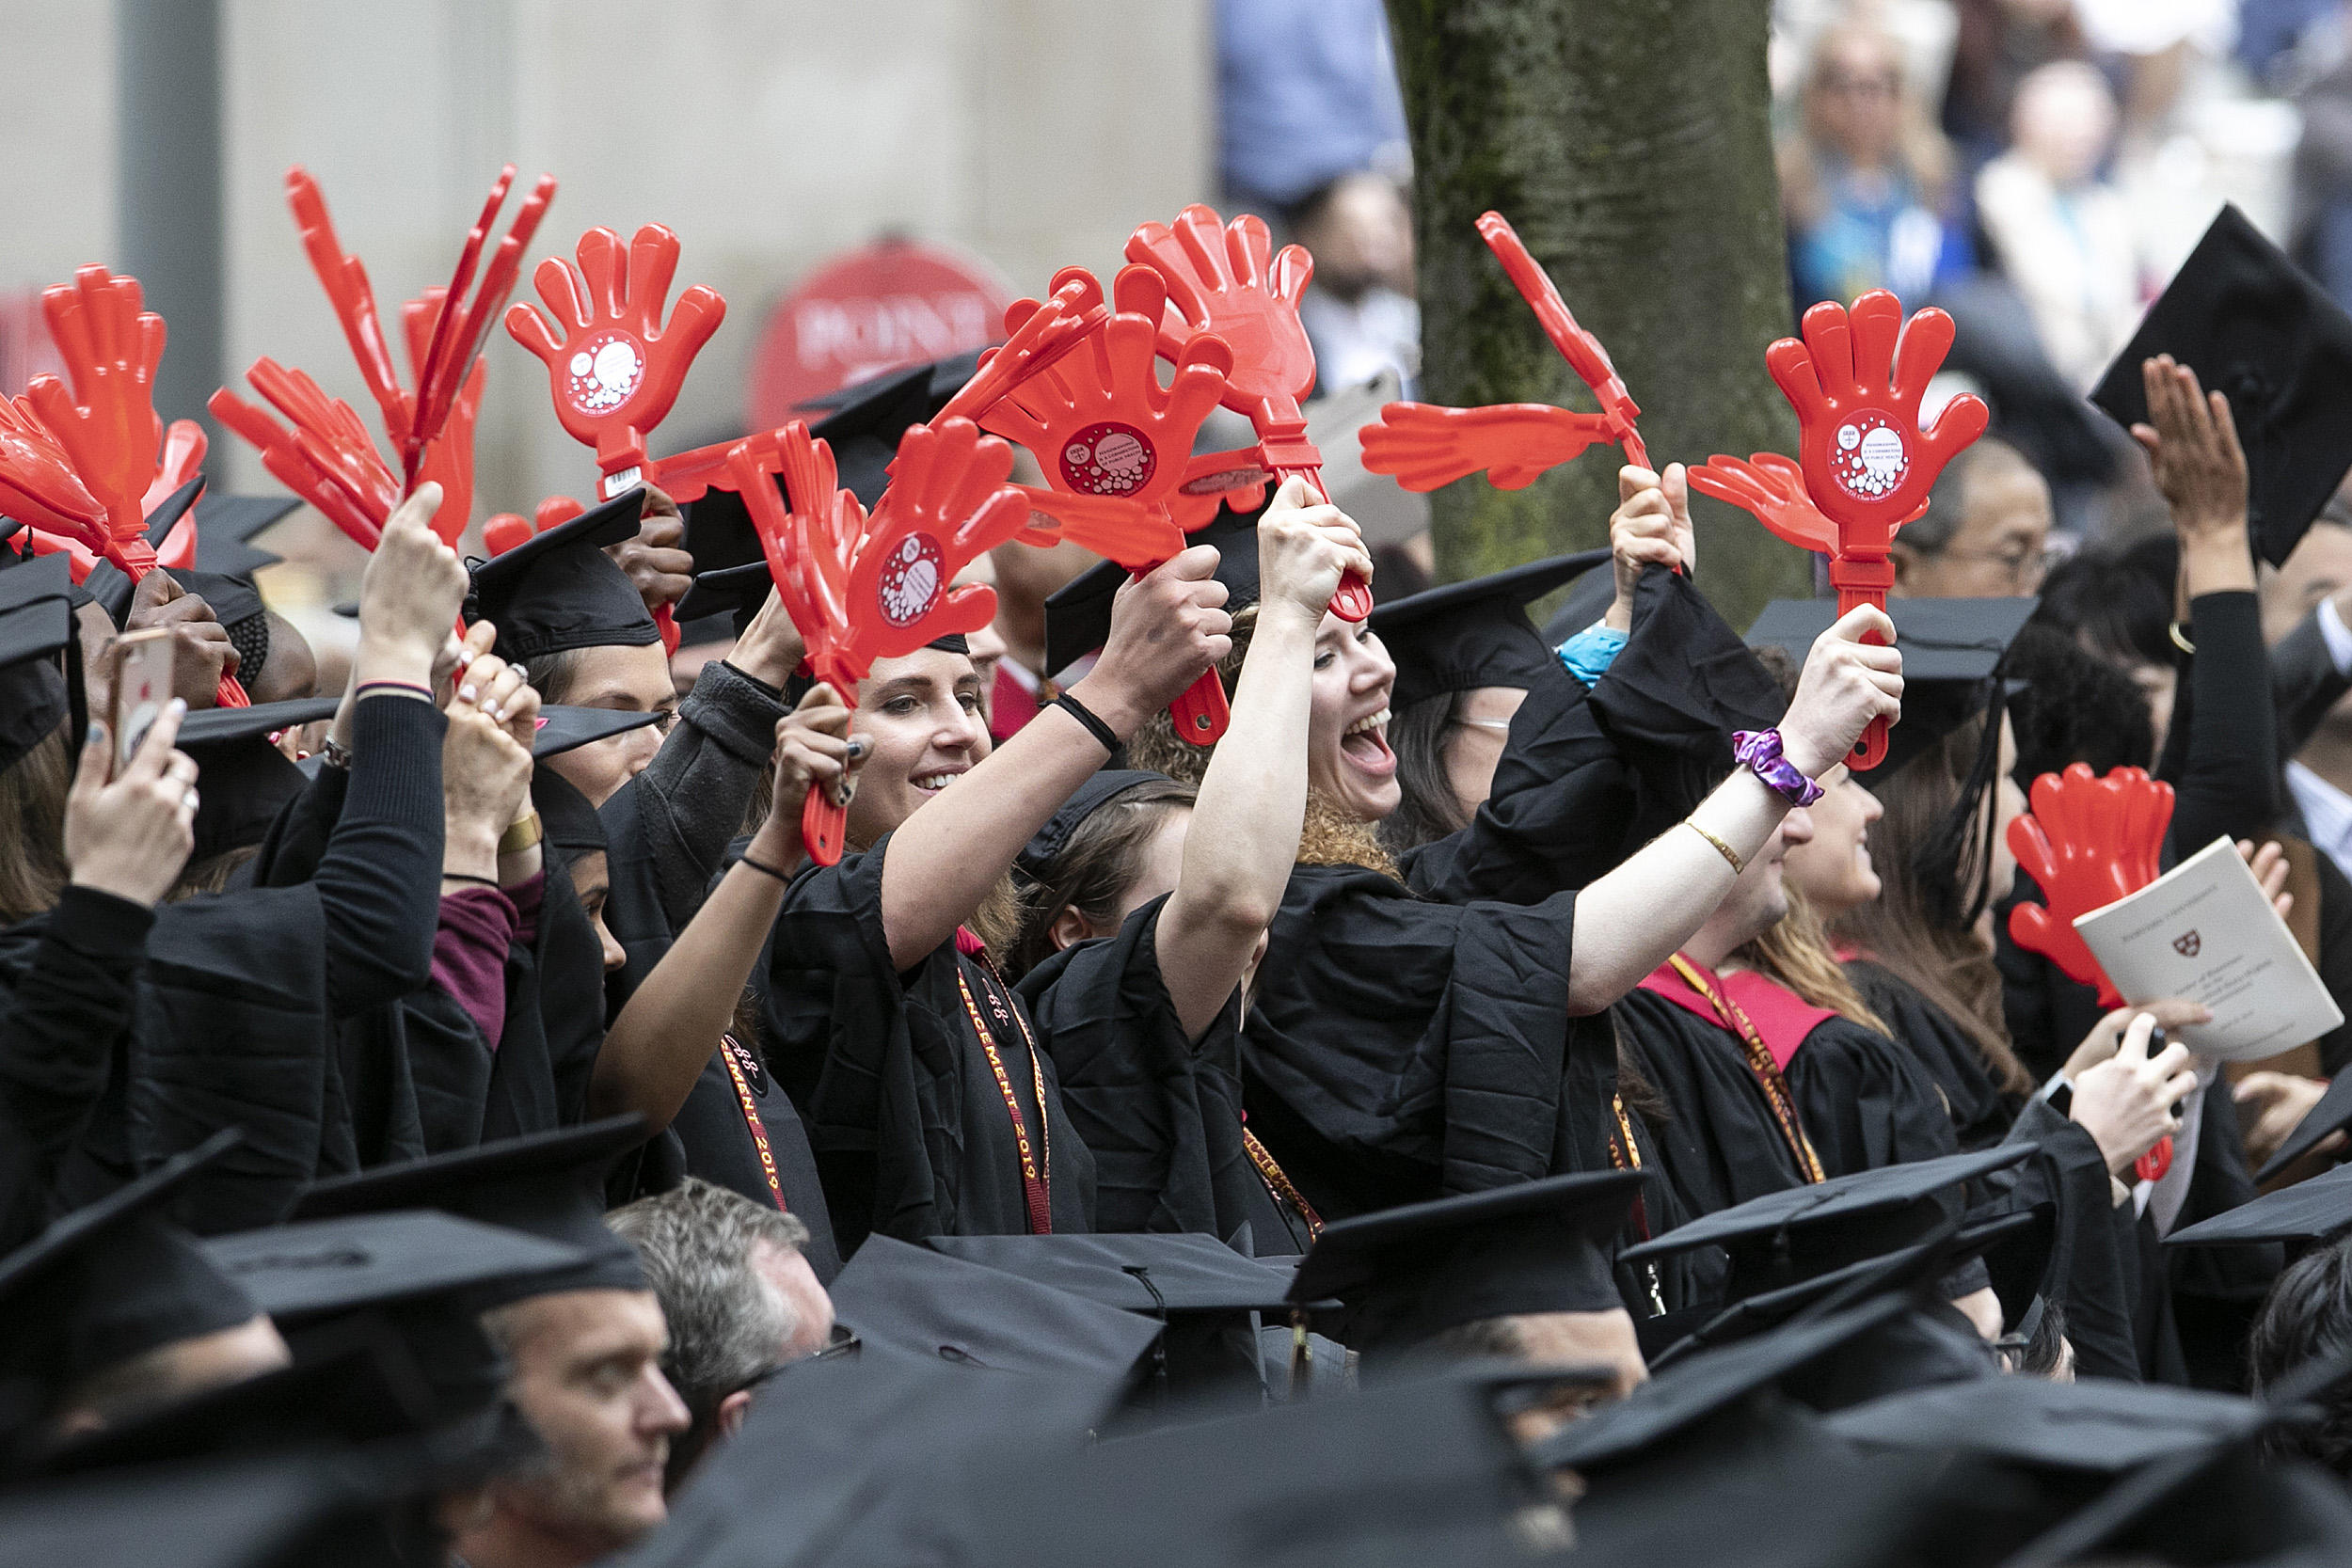 Harvard T.H. Chan School of Public Health graduates wave with red plastic clappers